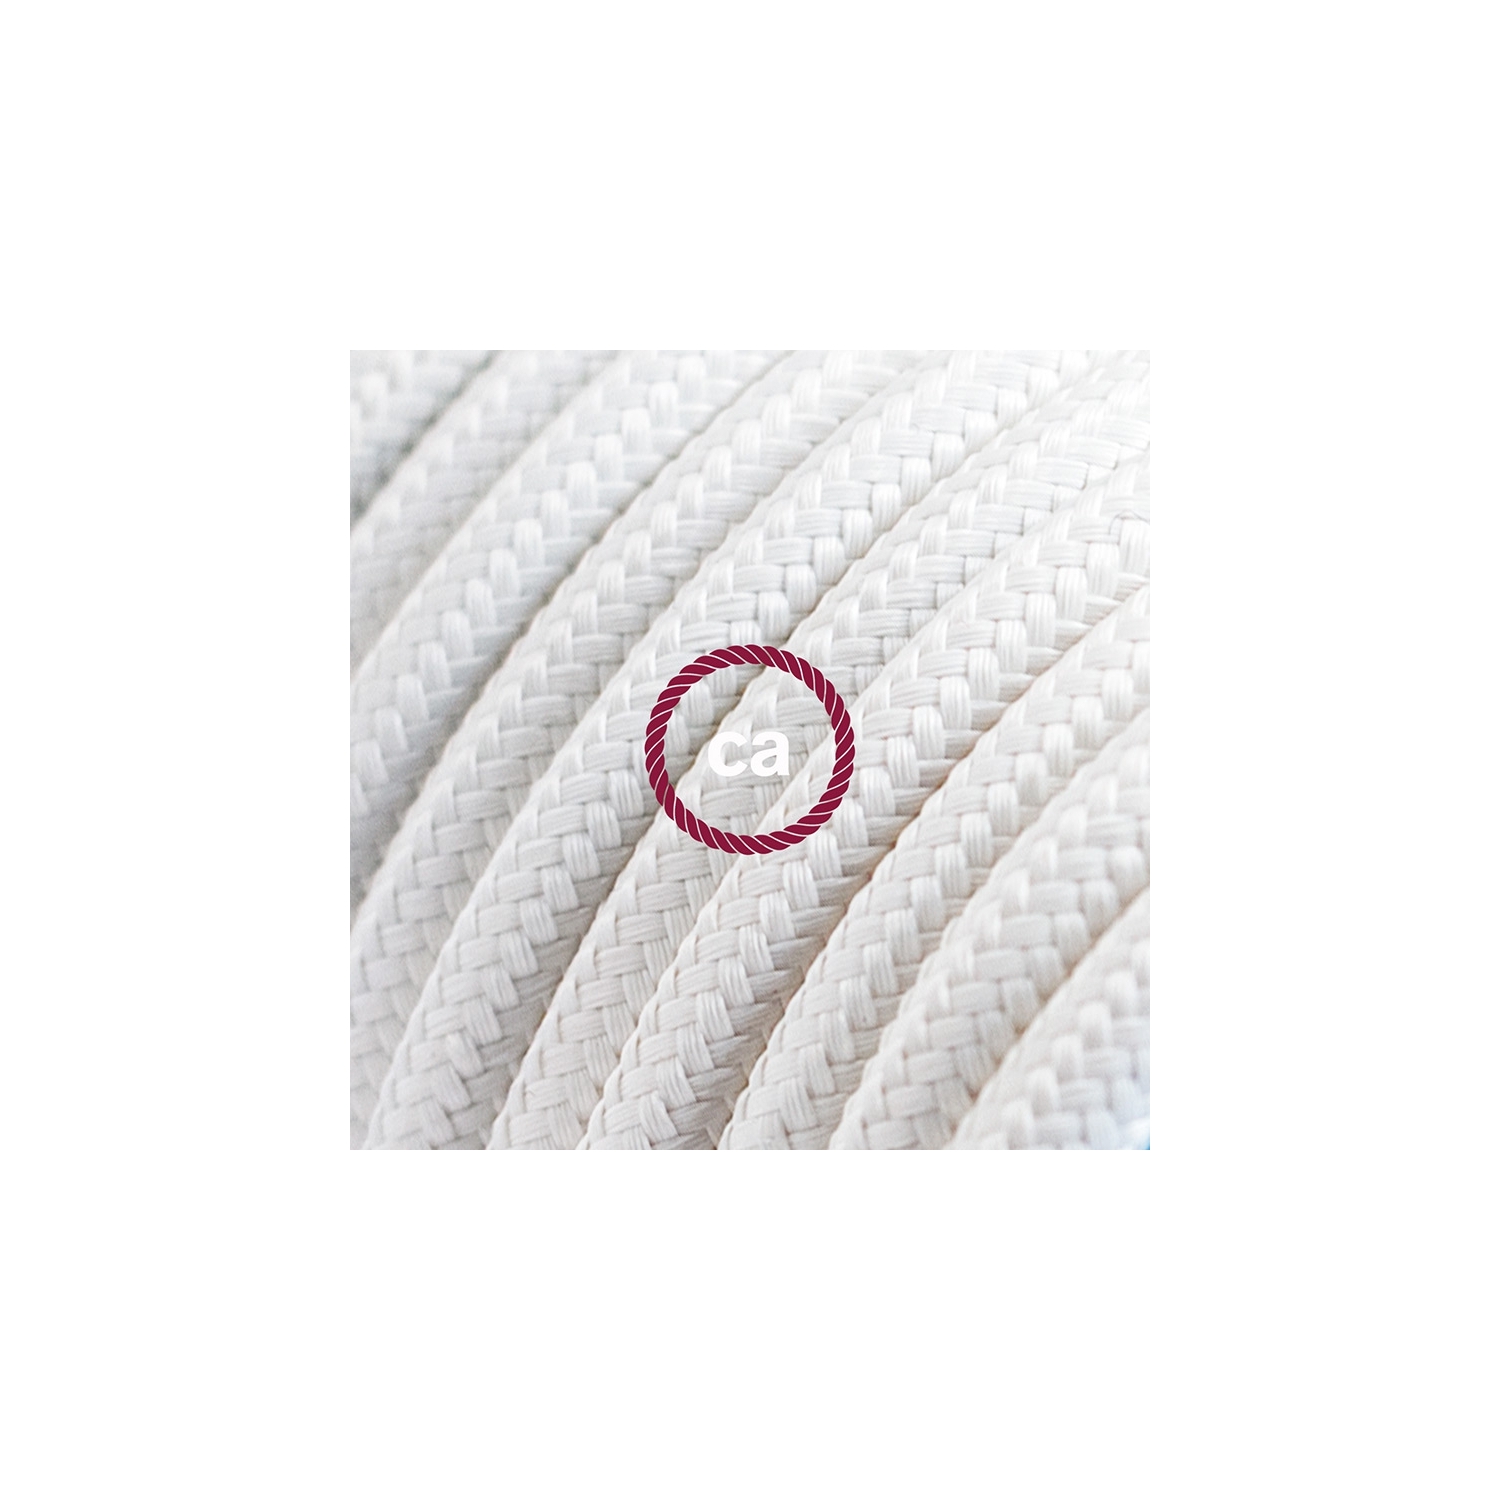 Cord-set - RM01 White Rayon Covered Round Cable